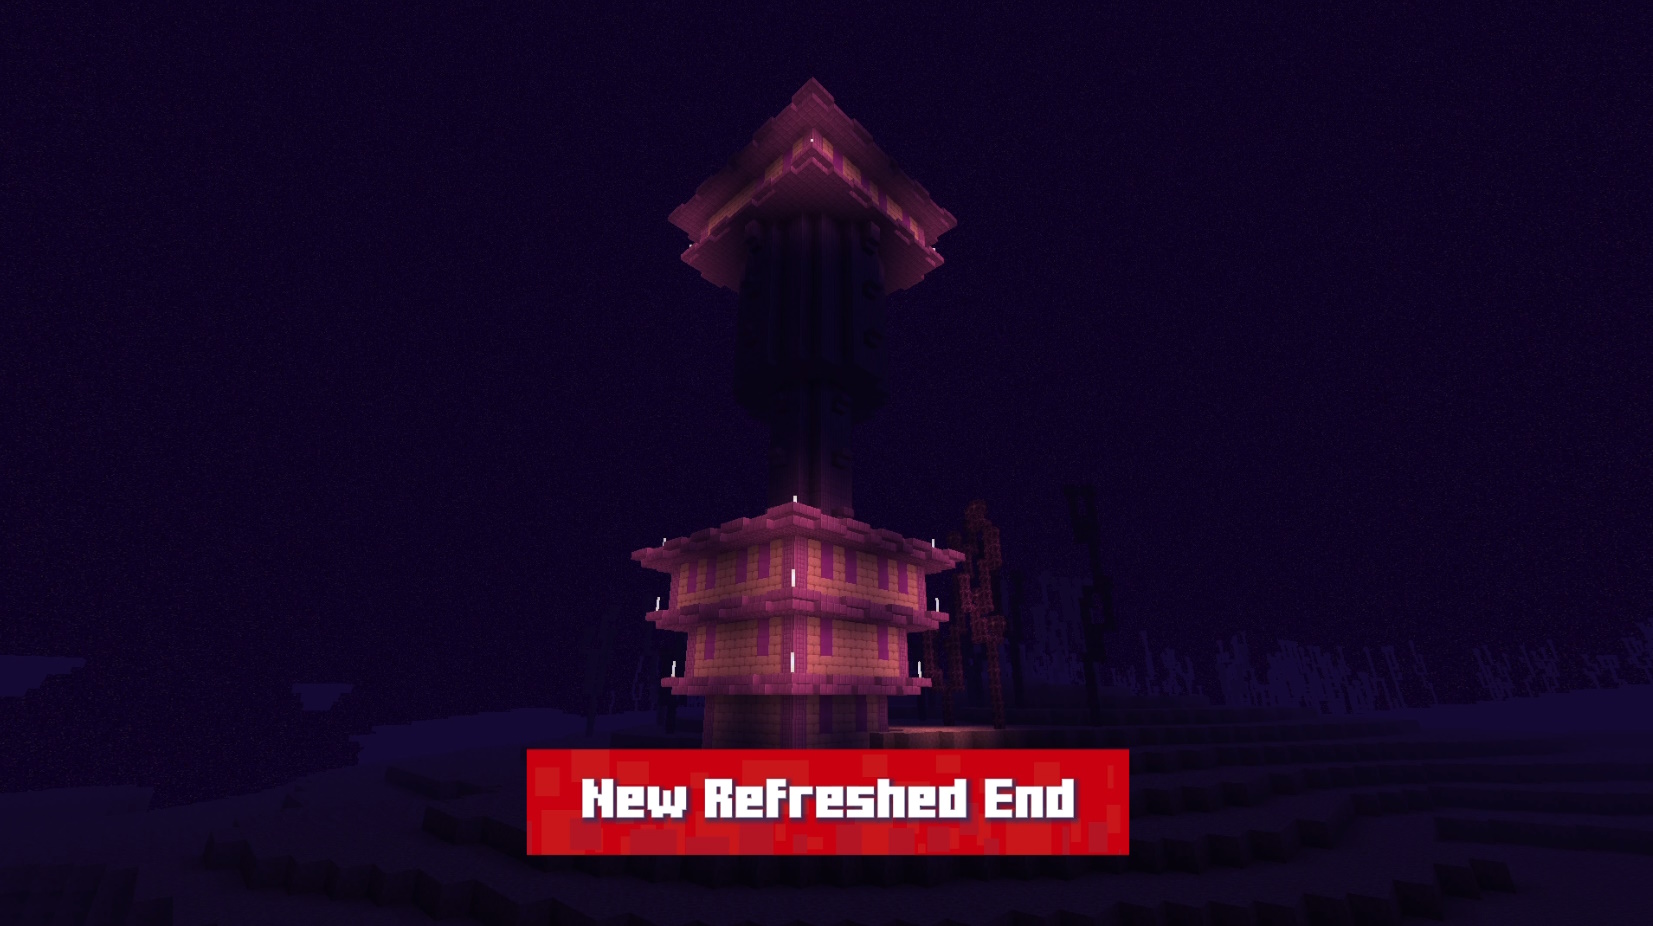 New Refreshed End